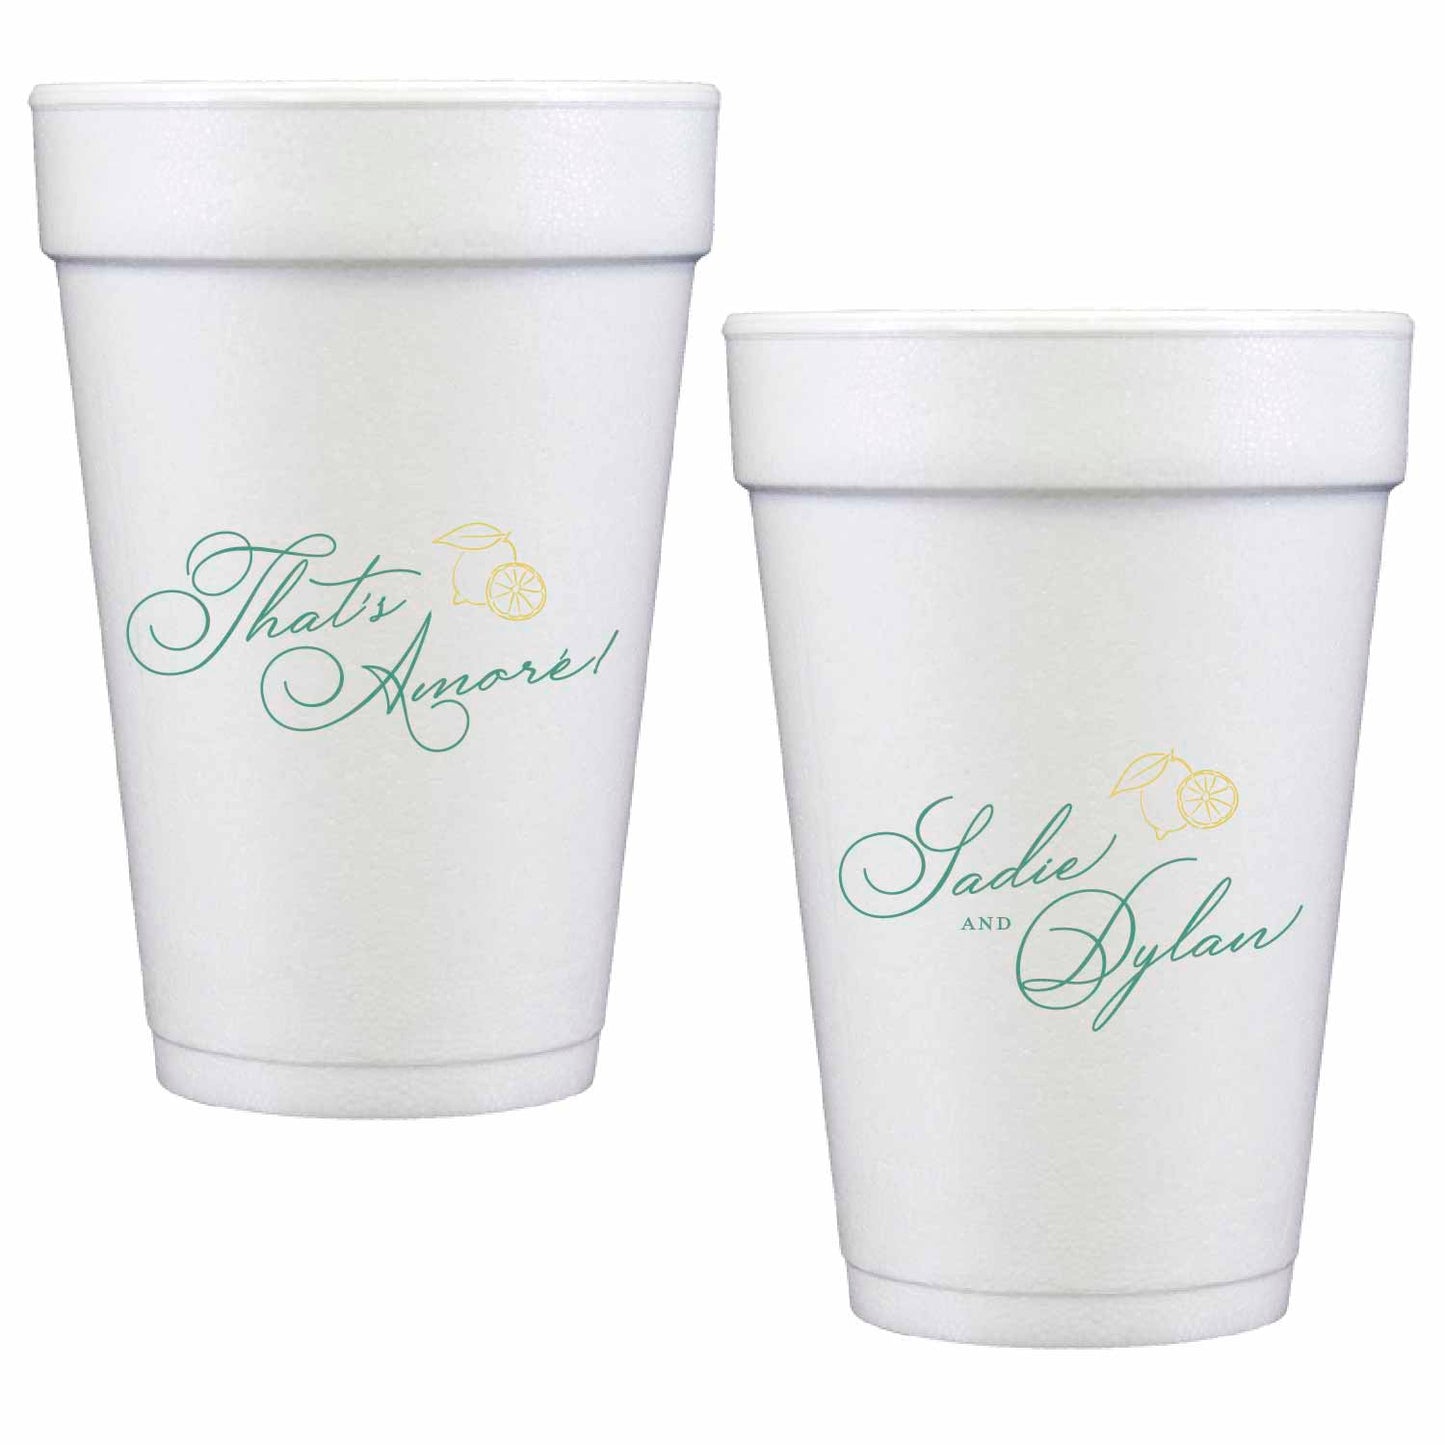 thats amore personalized styrofoam cup